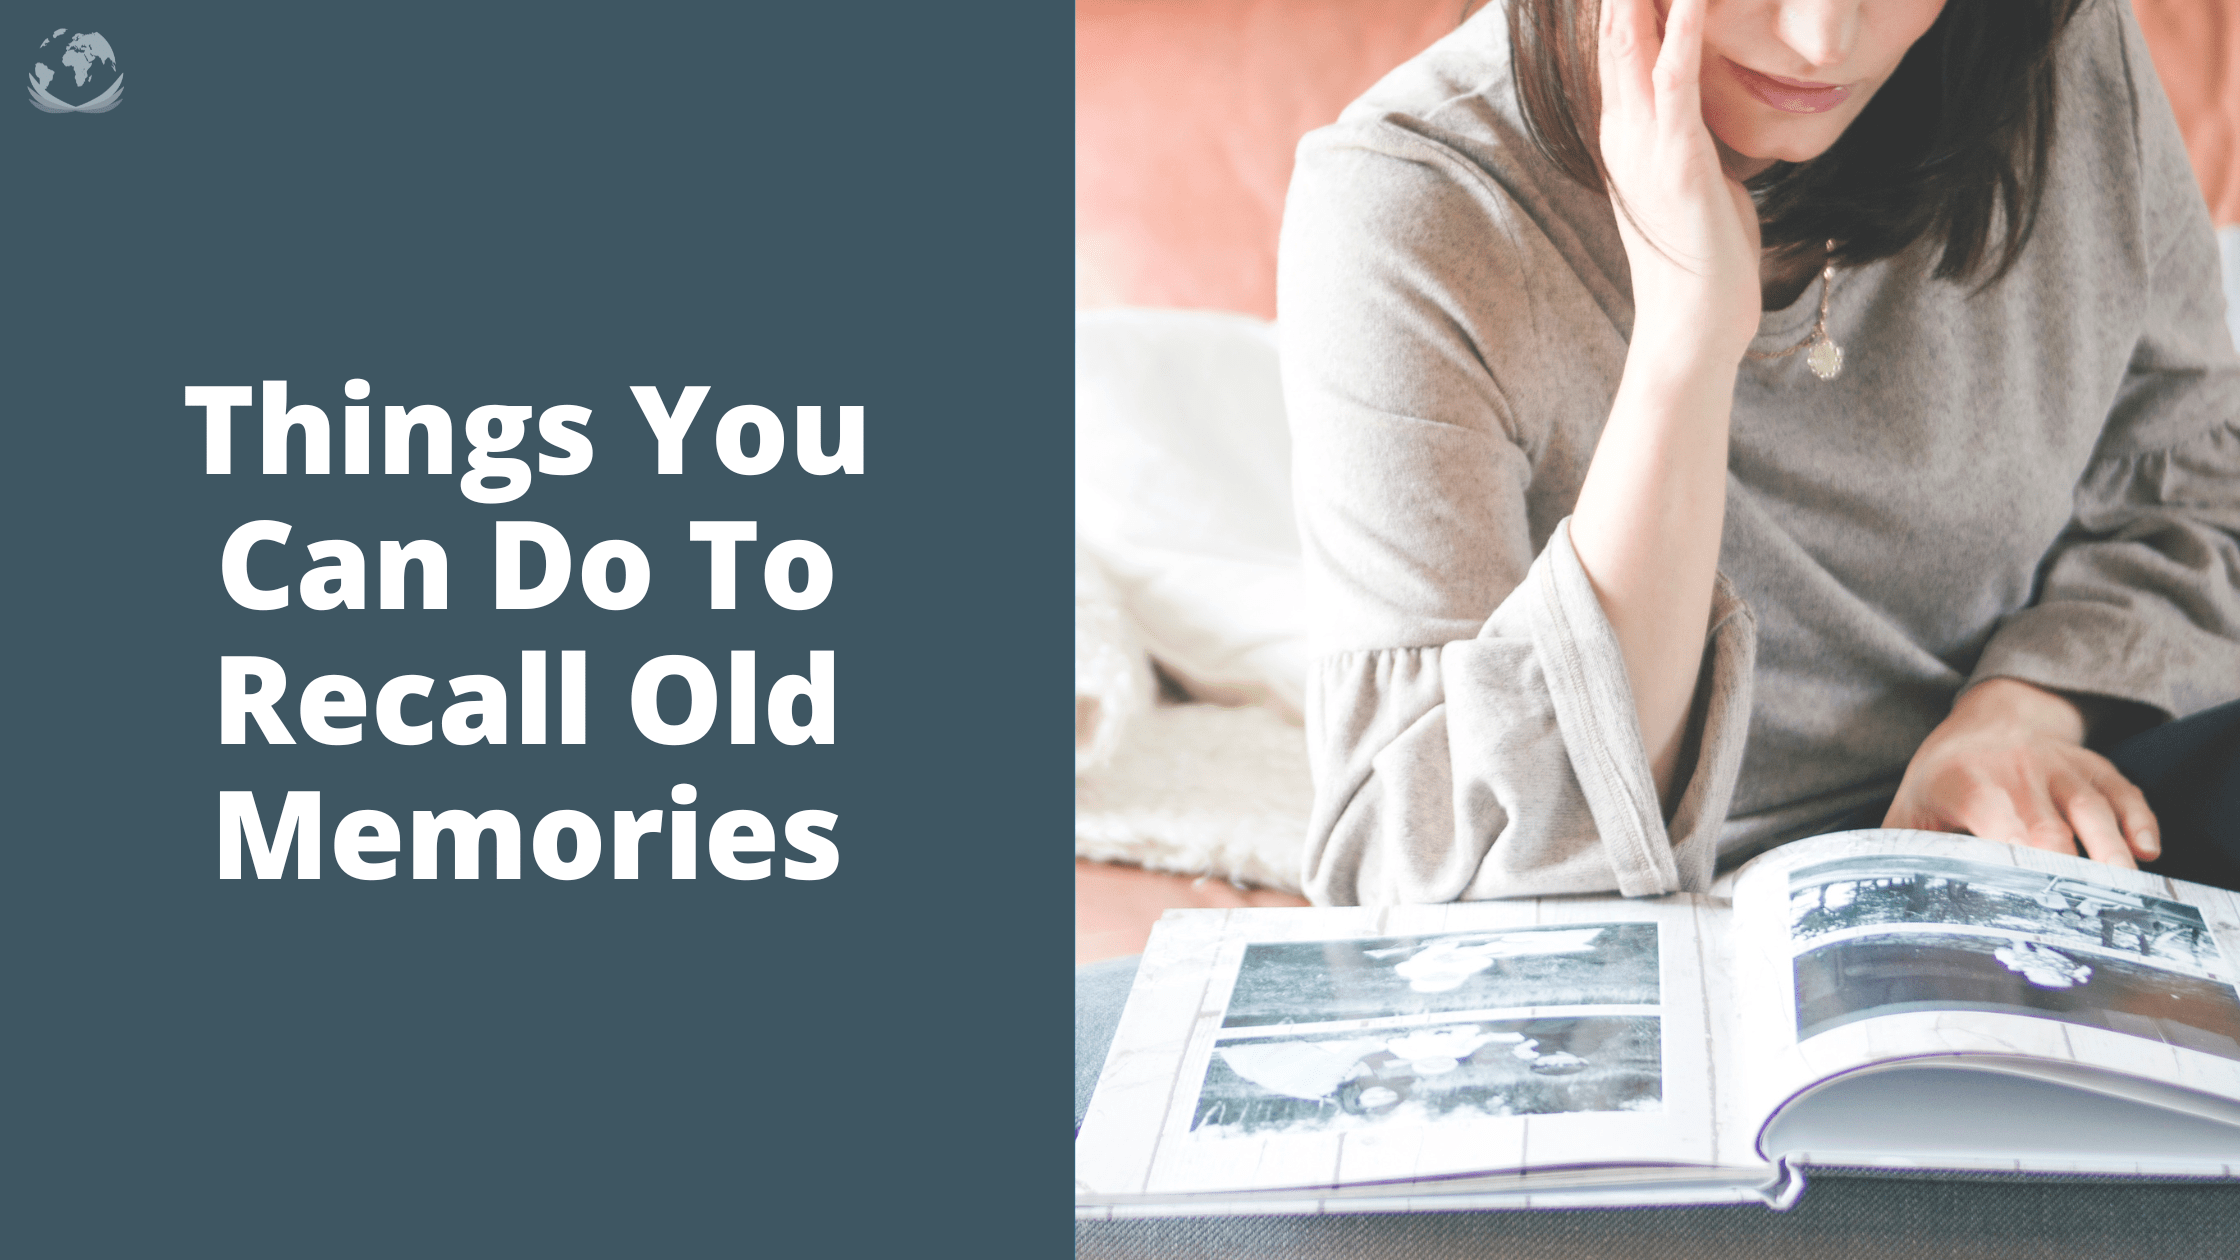 Things You Can Do To Recall Old Memories